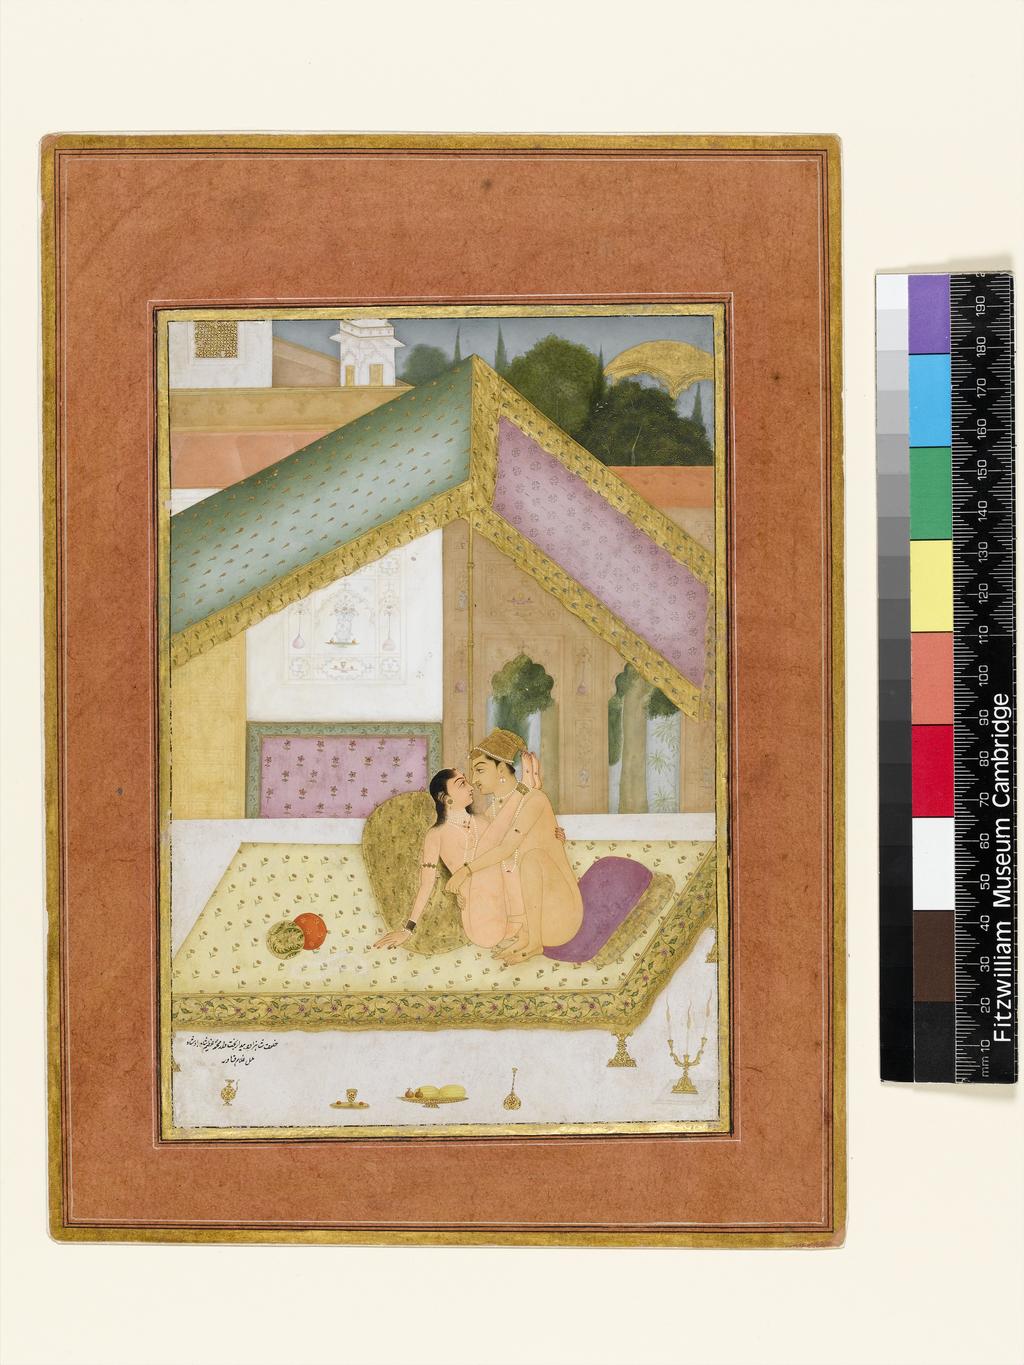 An image of The private pleasure of Prince Bedar Bakht, son of Emperor Muhammad Azim, by Gulam Qadir. Bodycolour including white, pen and ink with gold on paper, height 197mm, width 134mm, circa 1678.